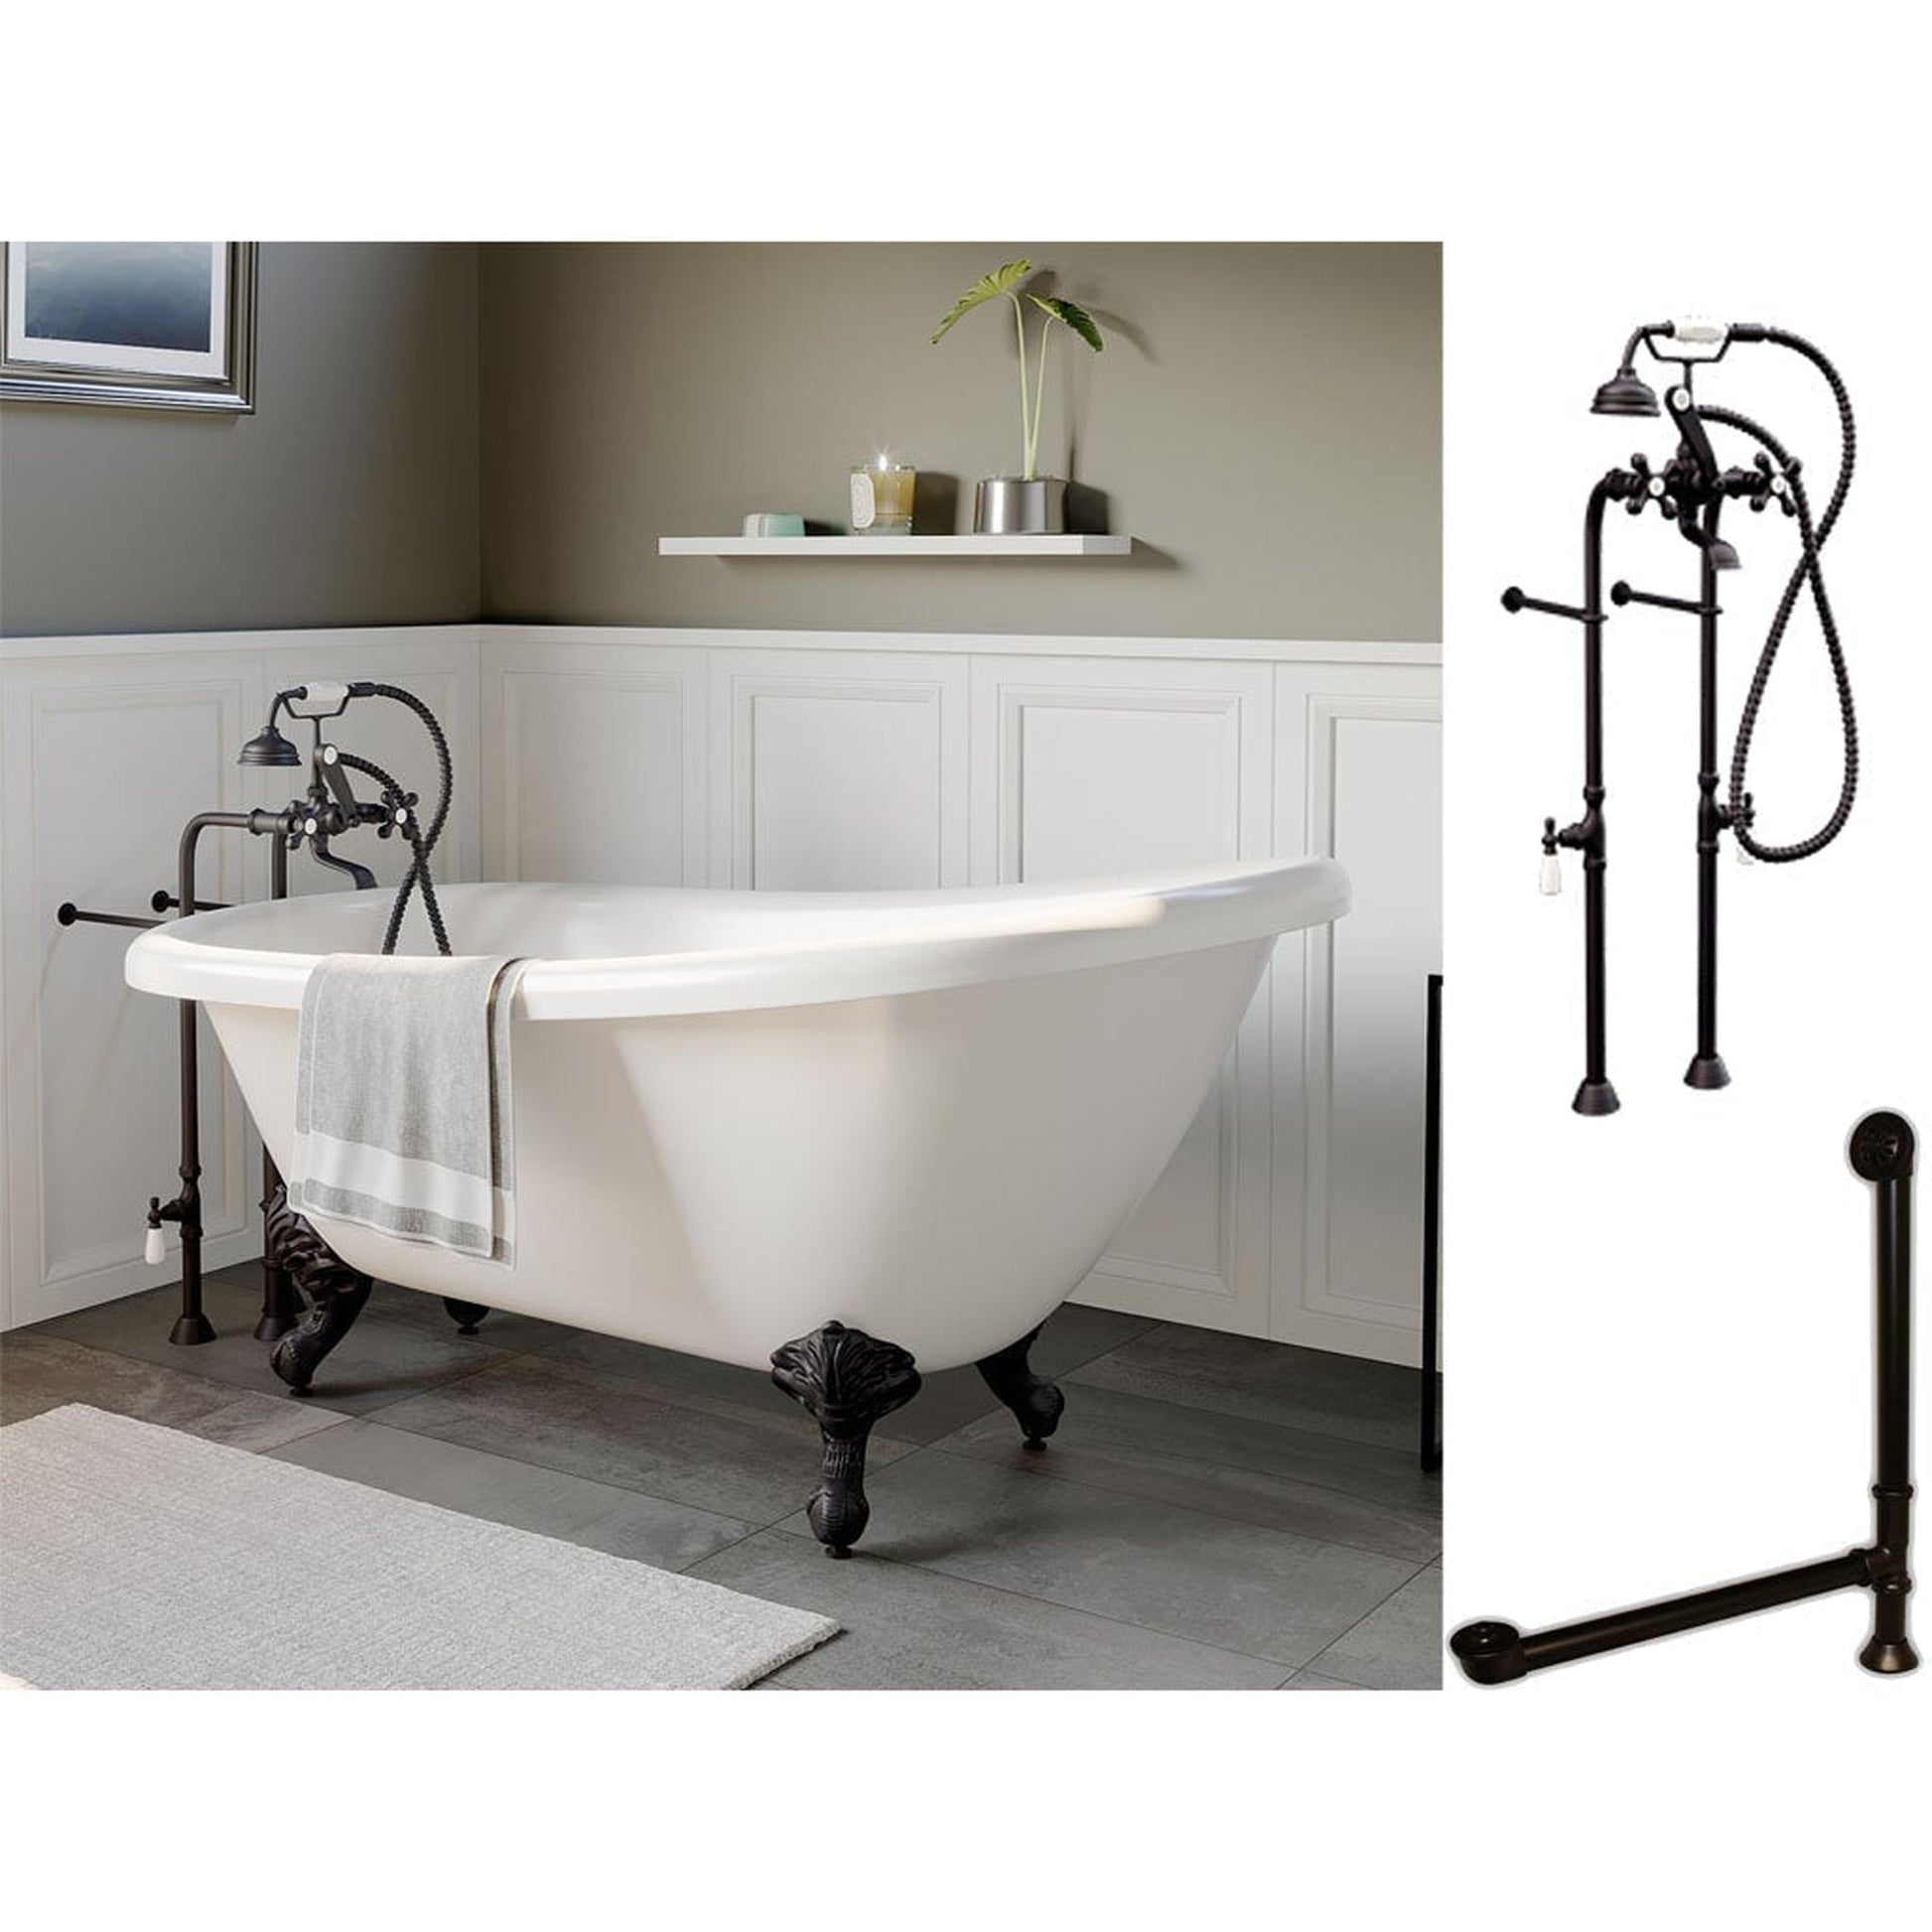 Cambridge Plumbing 61" White Acrylic Single Slipper Clawfeet Bathtub With No Deck Holes And Complete Plumbing Package Including Floor Mounted British Telephone Faucet, Supply Lines, Drain And Overflow Assembly In Oil Rubbed Bronze